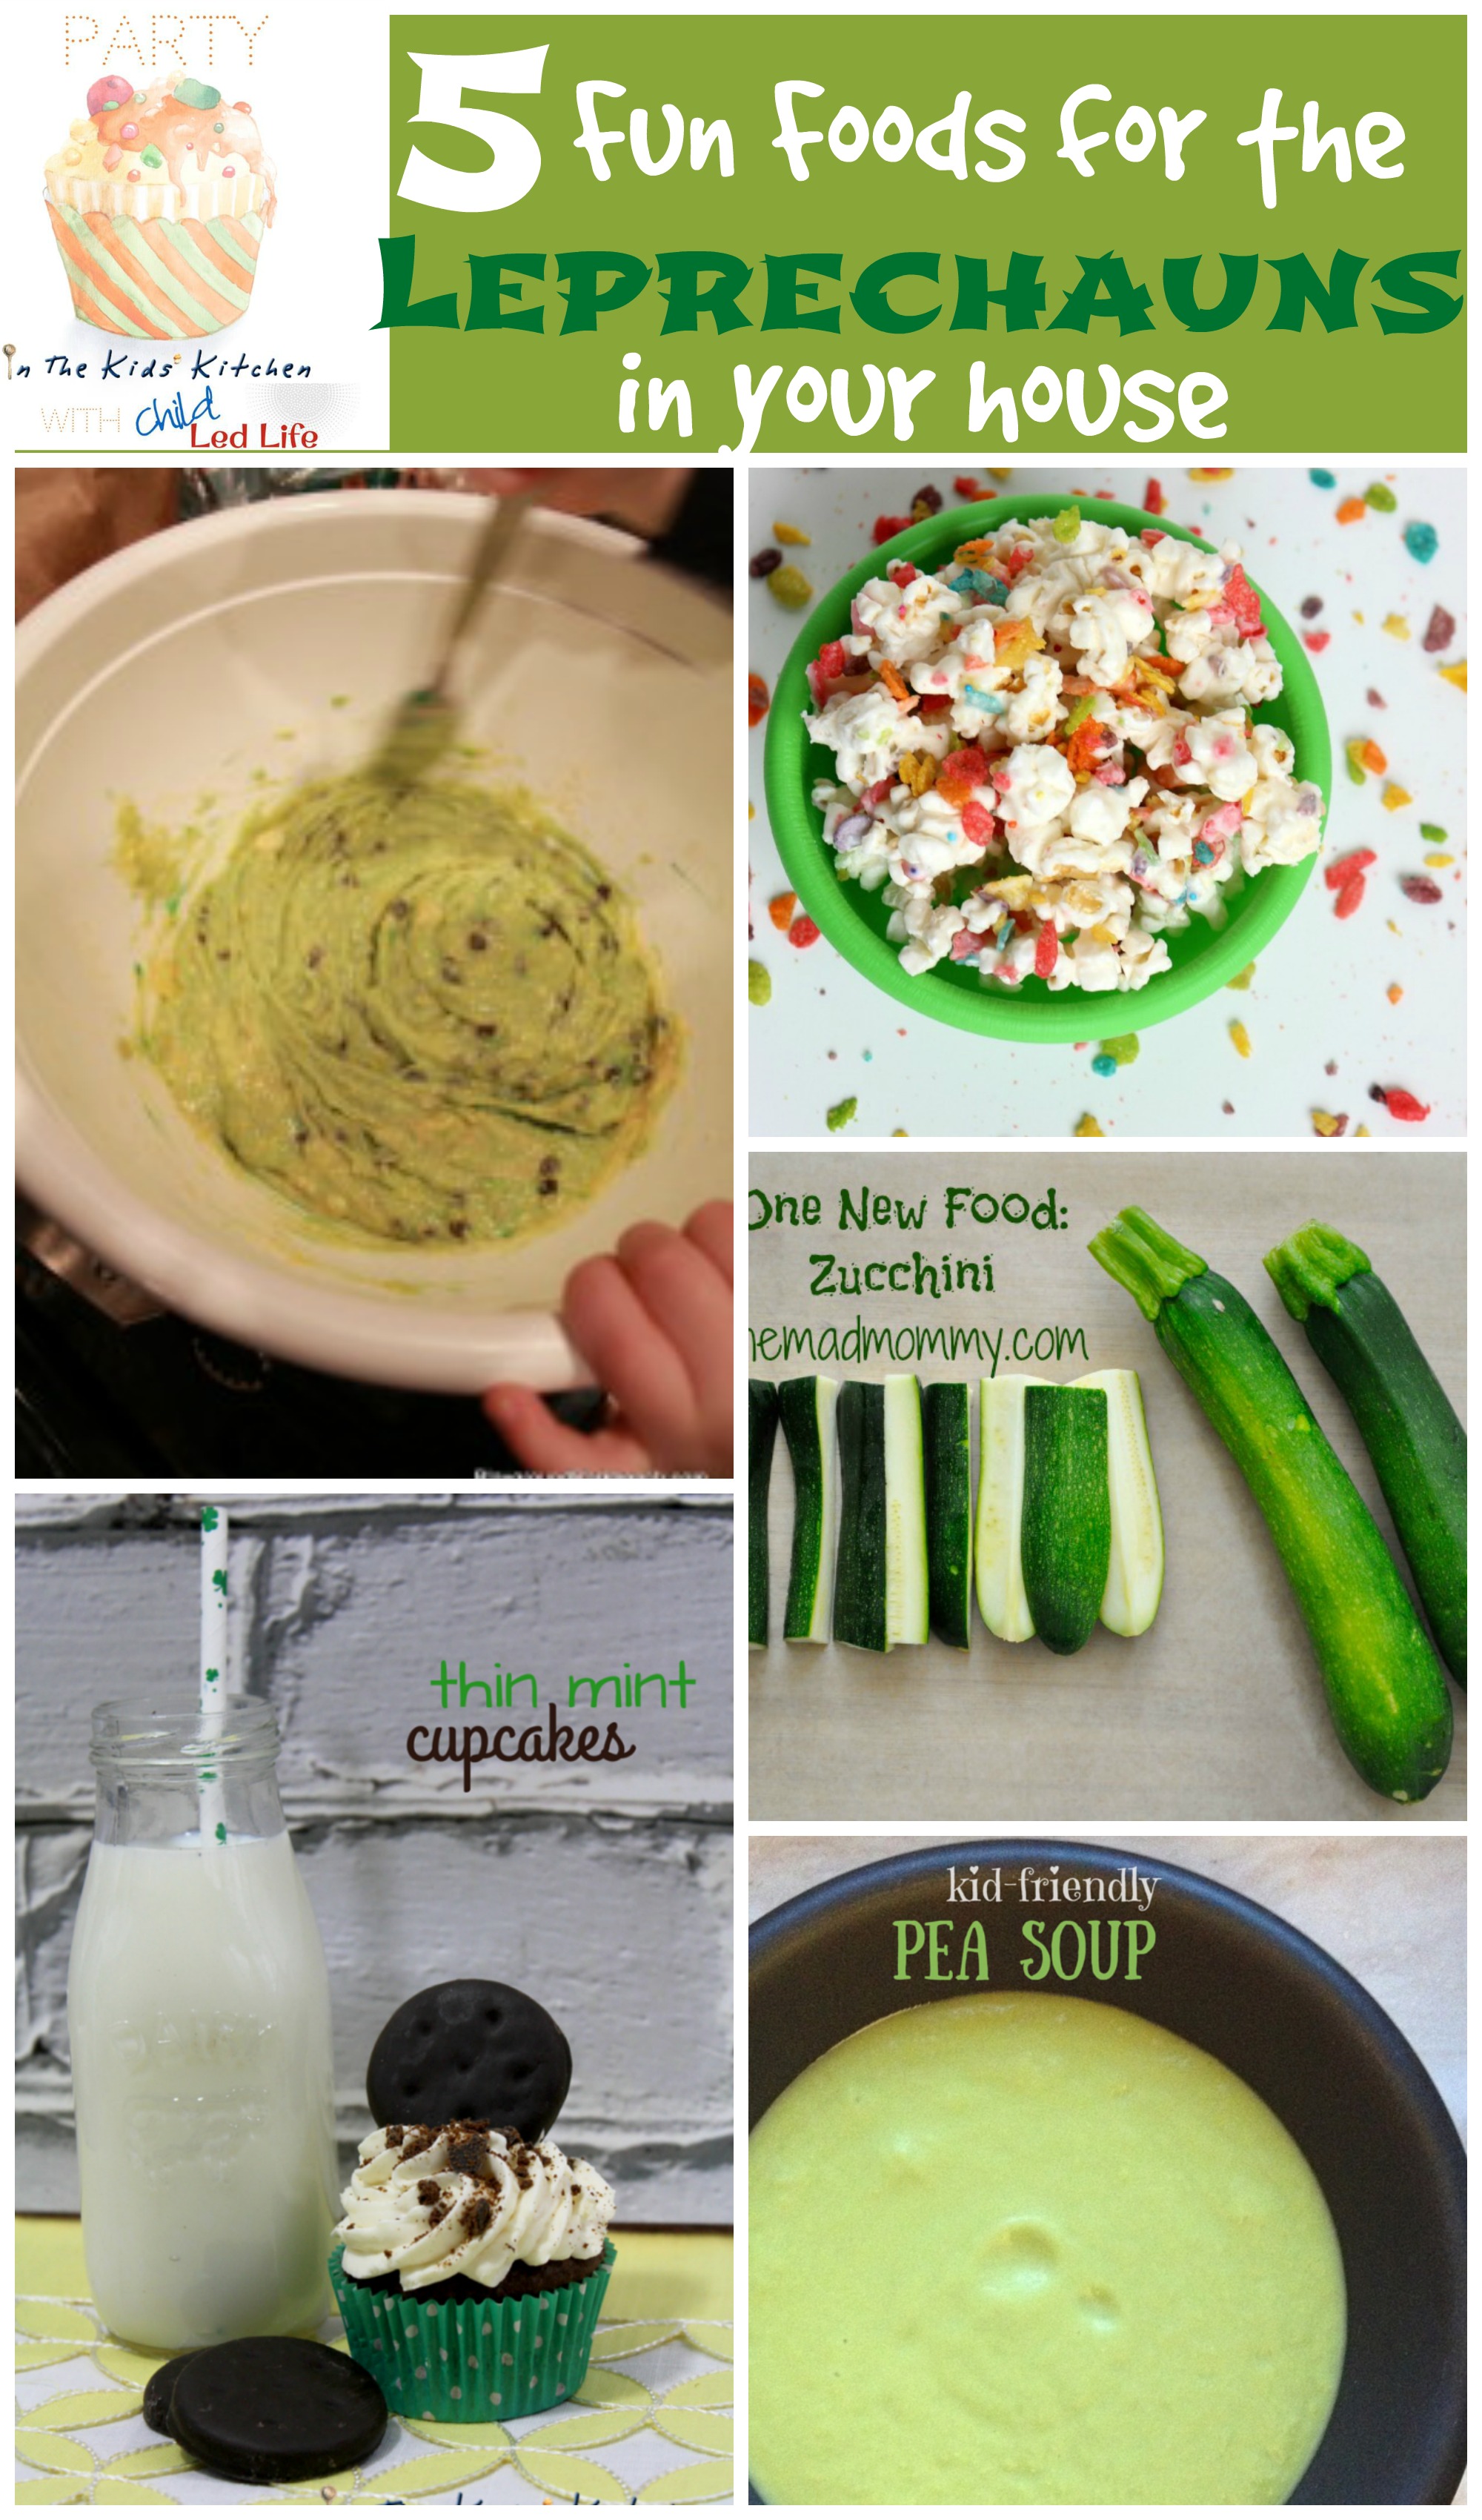 5 Fun Food for the Leprechauns in your house and Party In The Kids' Kitchen link up party on ChildLedLife.com